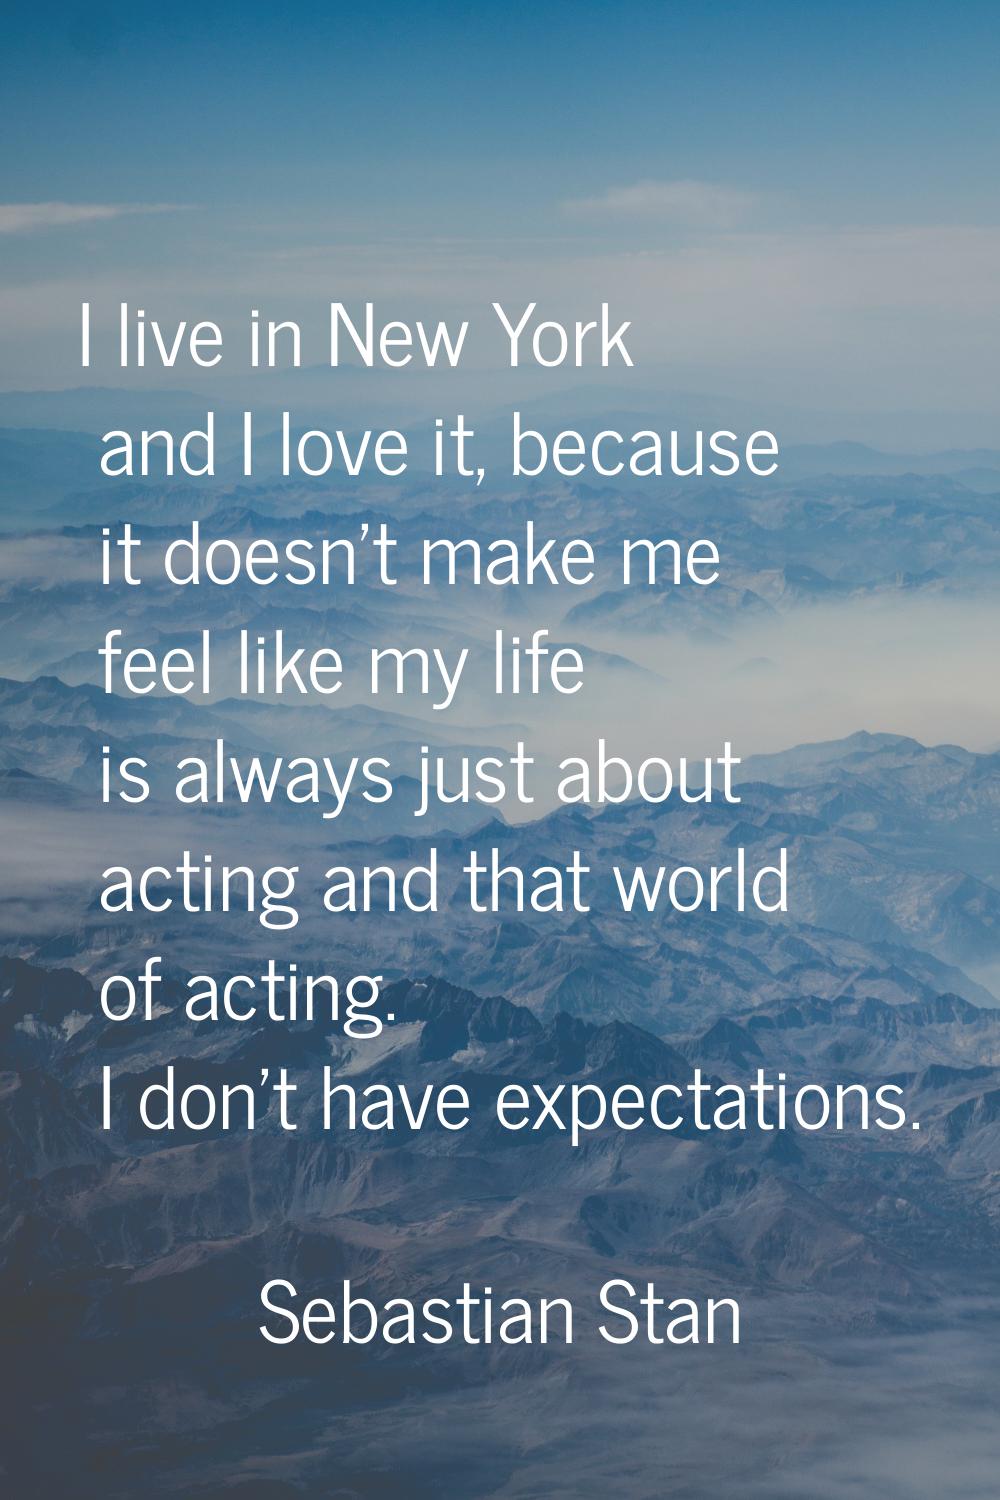 I live in New York and I love it, because it doesn't make me feel like my life is always just about